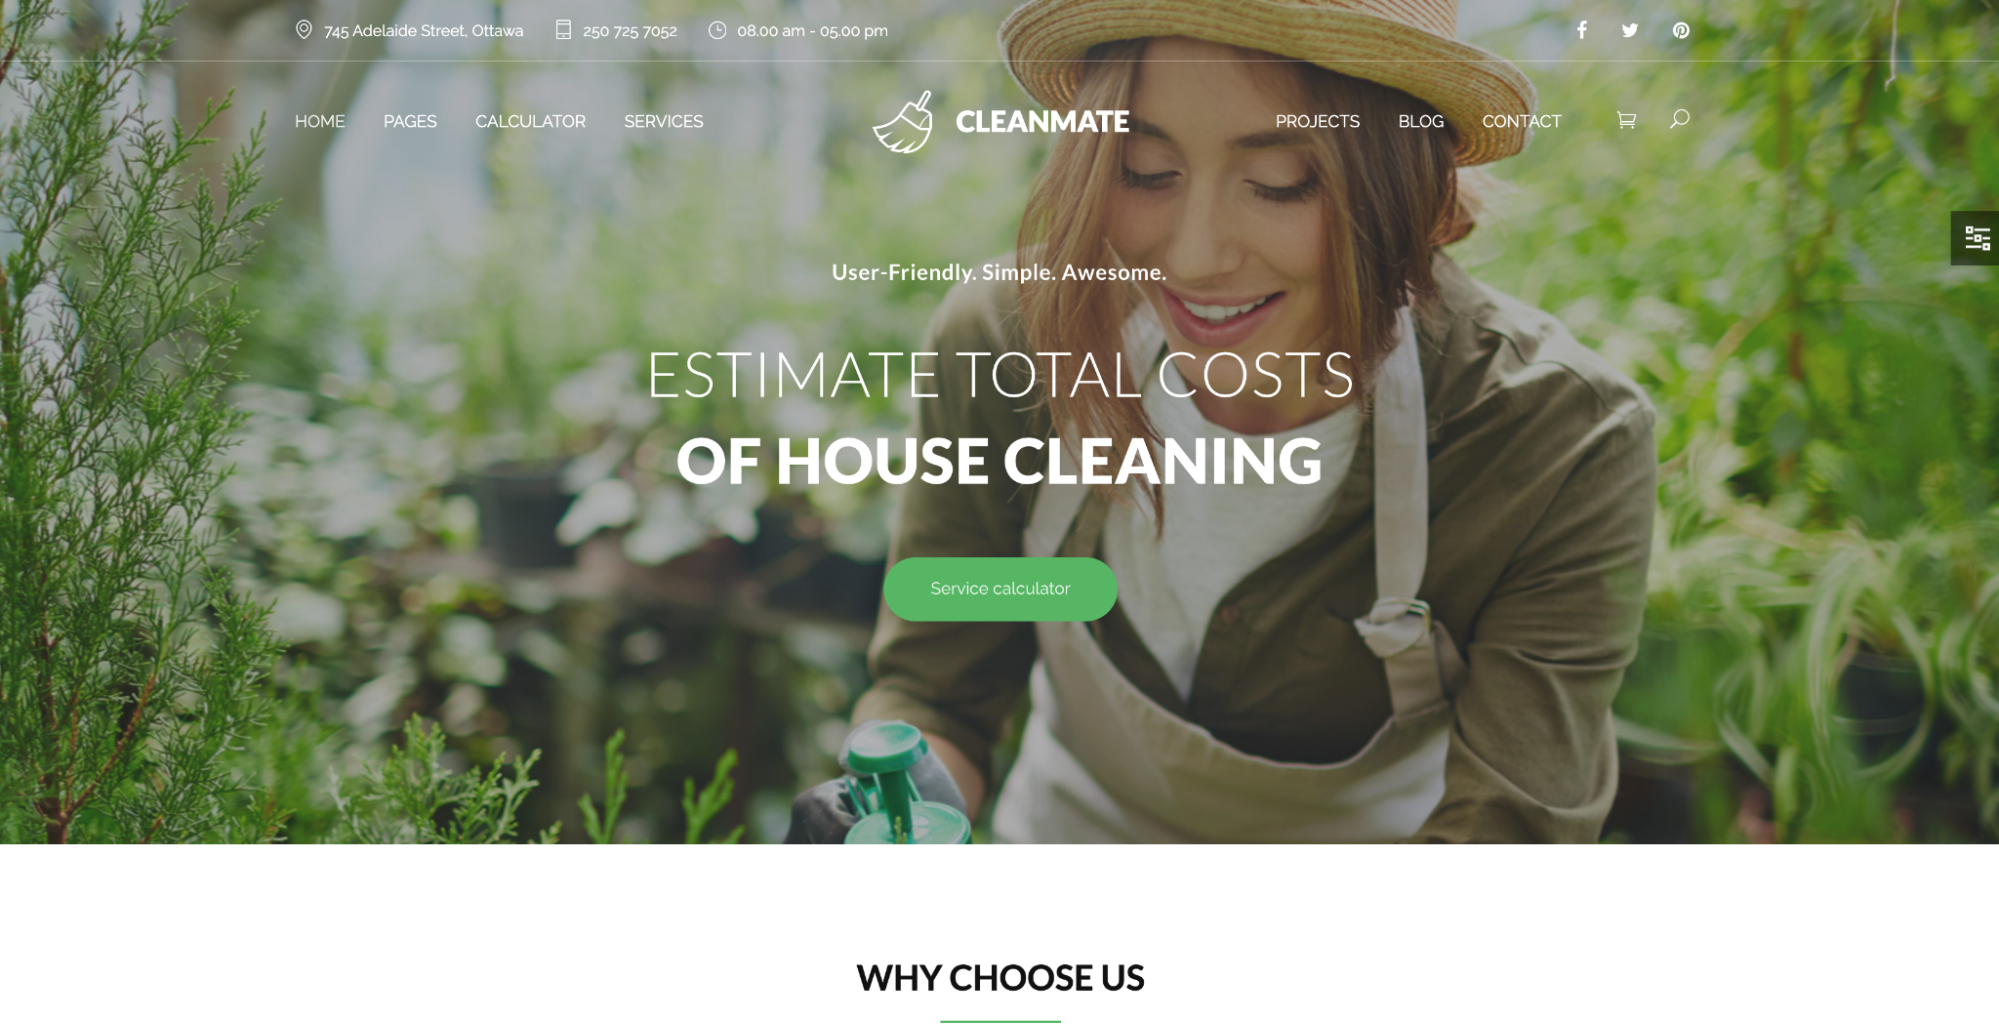 CleanMate Cleaning Service WordPress Theme